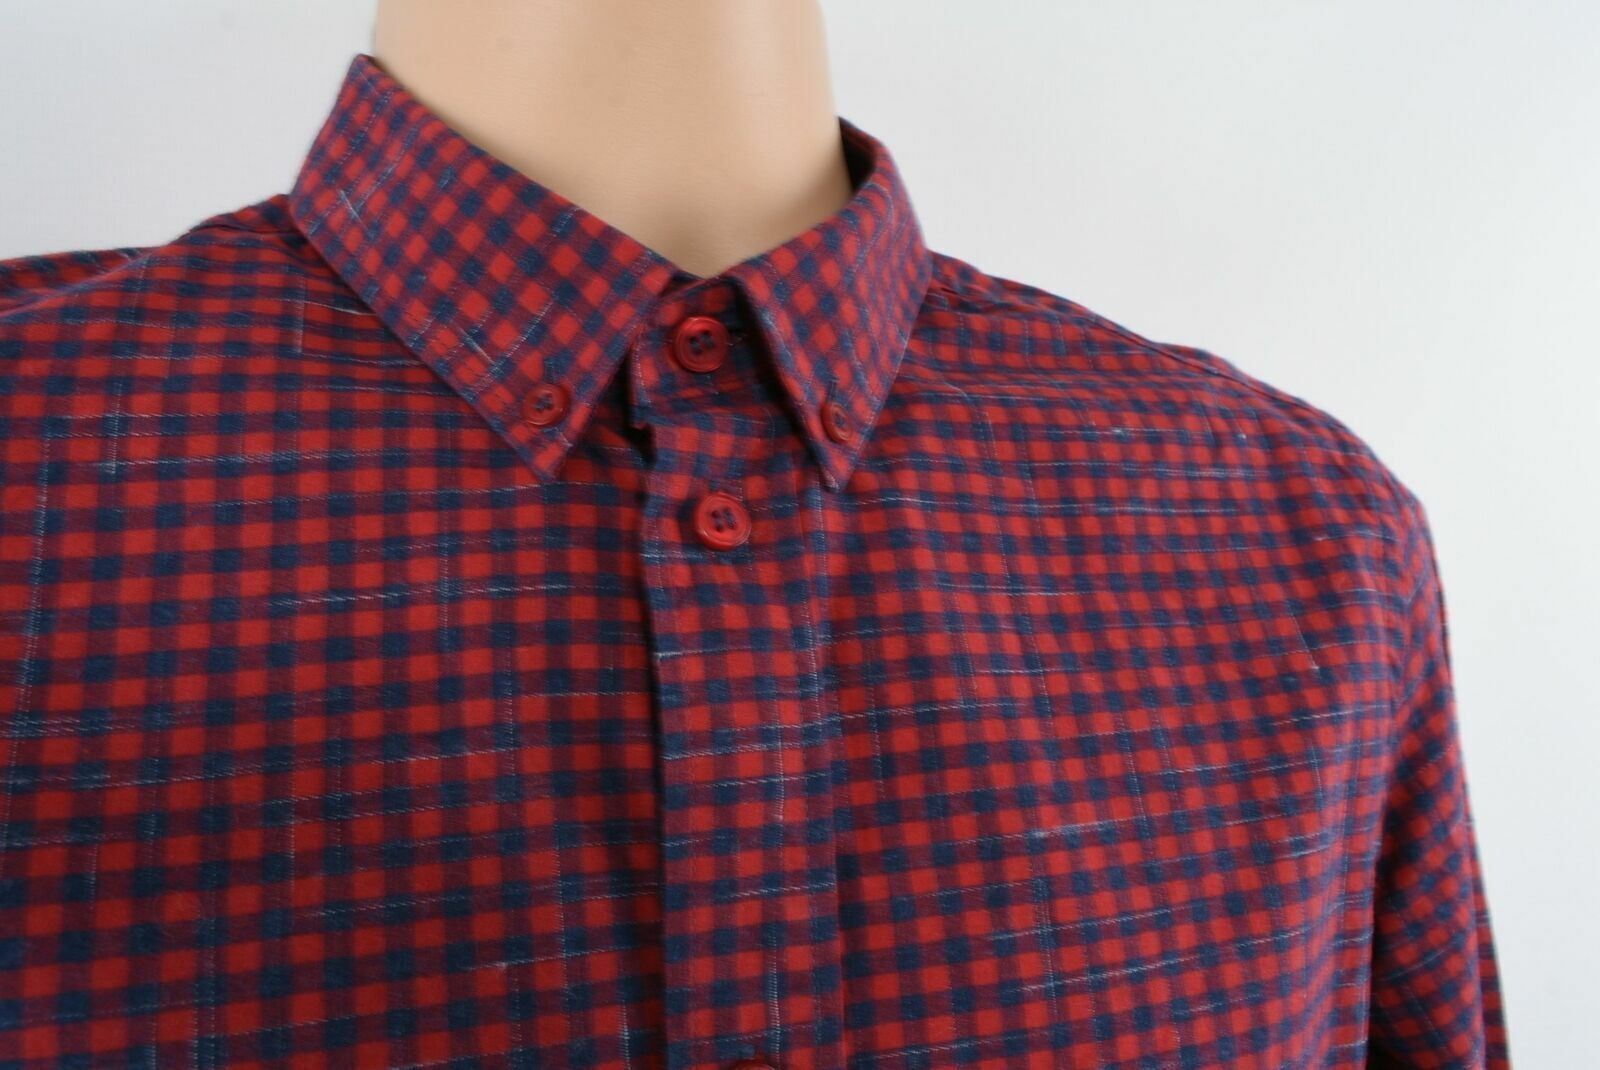 CARVEN Women's Checked Long Sleeve Button Down Shirt Size 37 UK 8 to UK 10